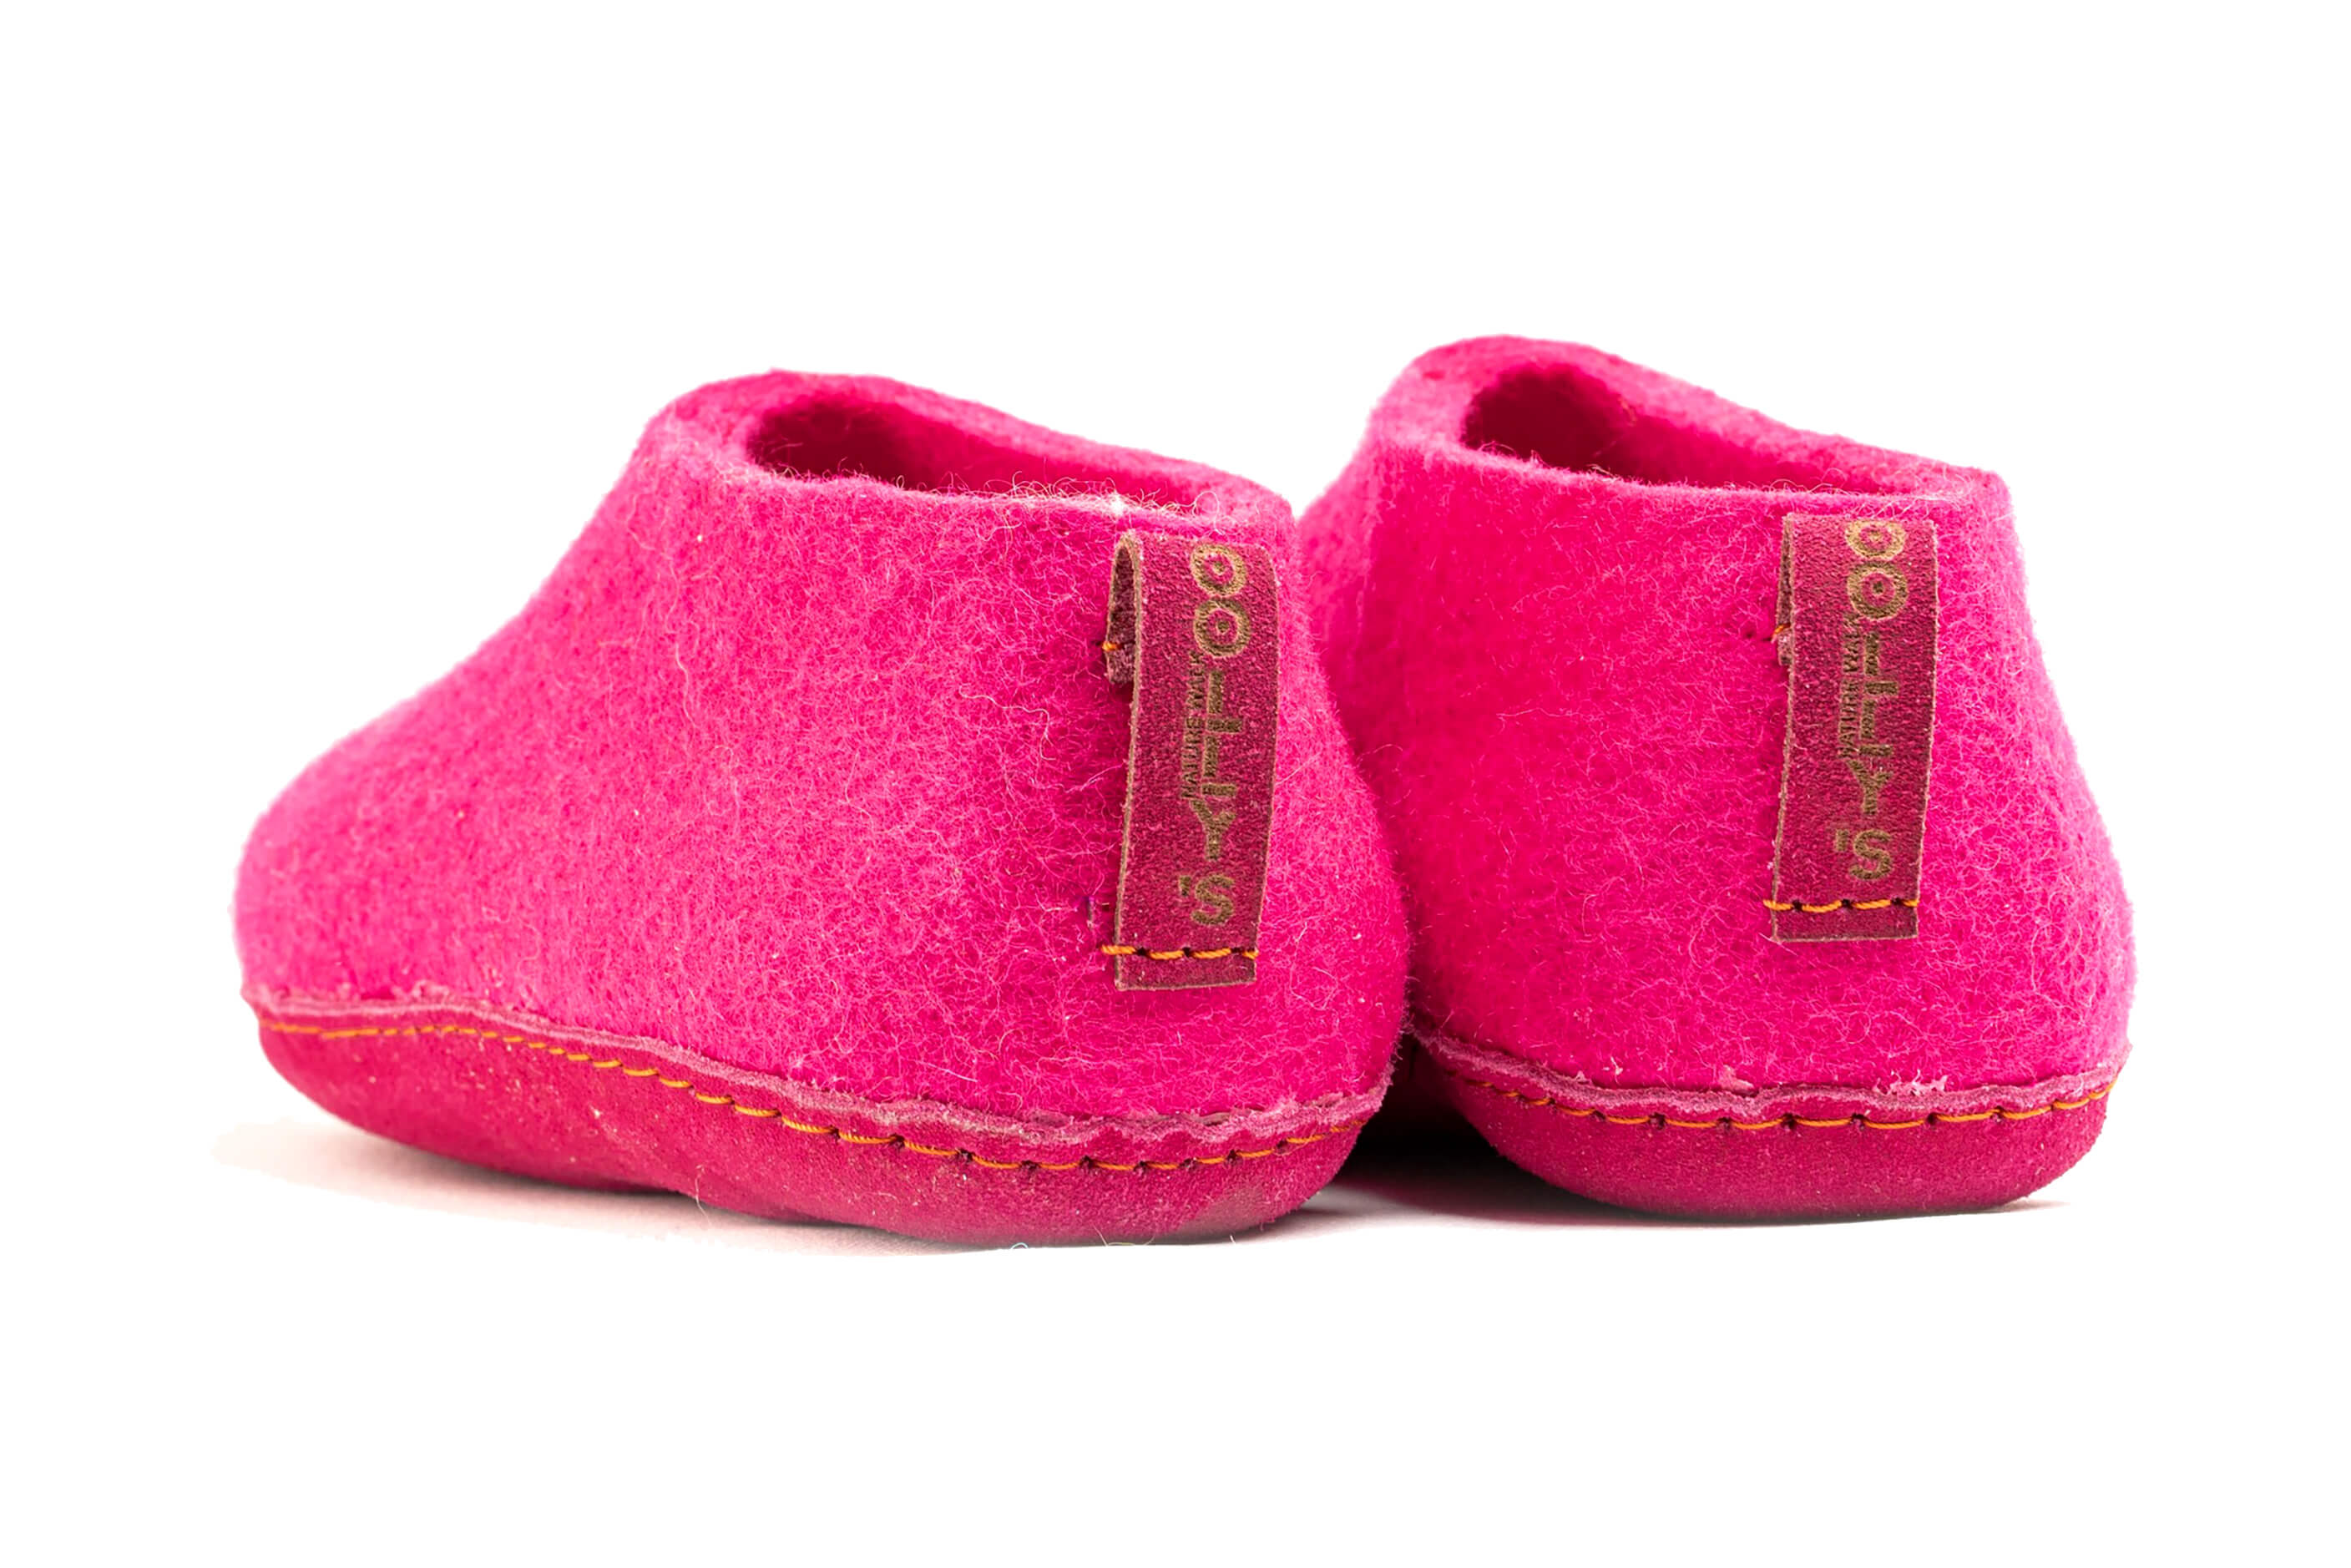 Indoor Shoes With Leather Sole - Fuchsia